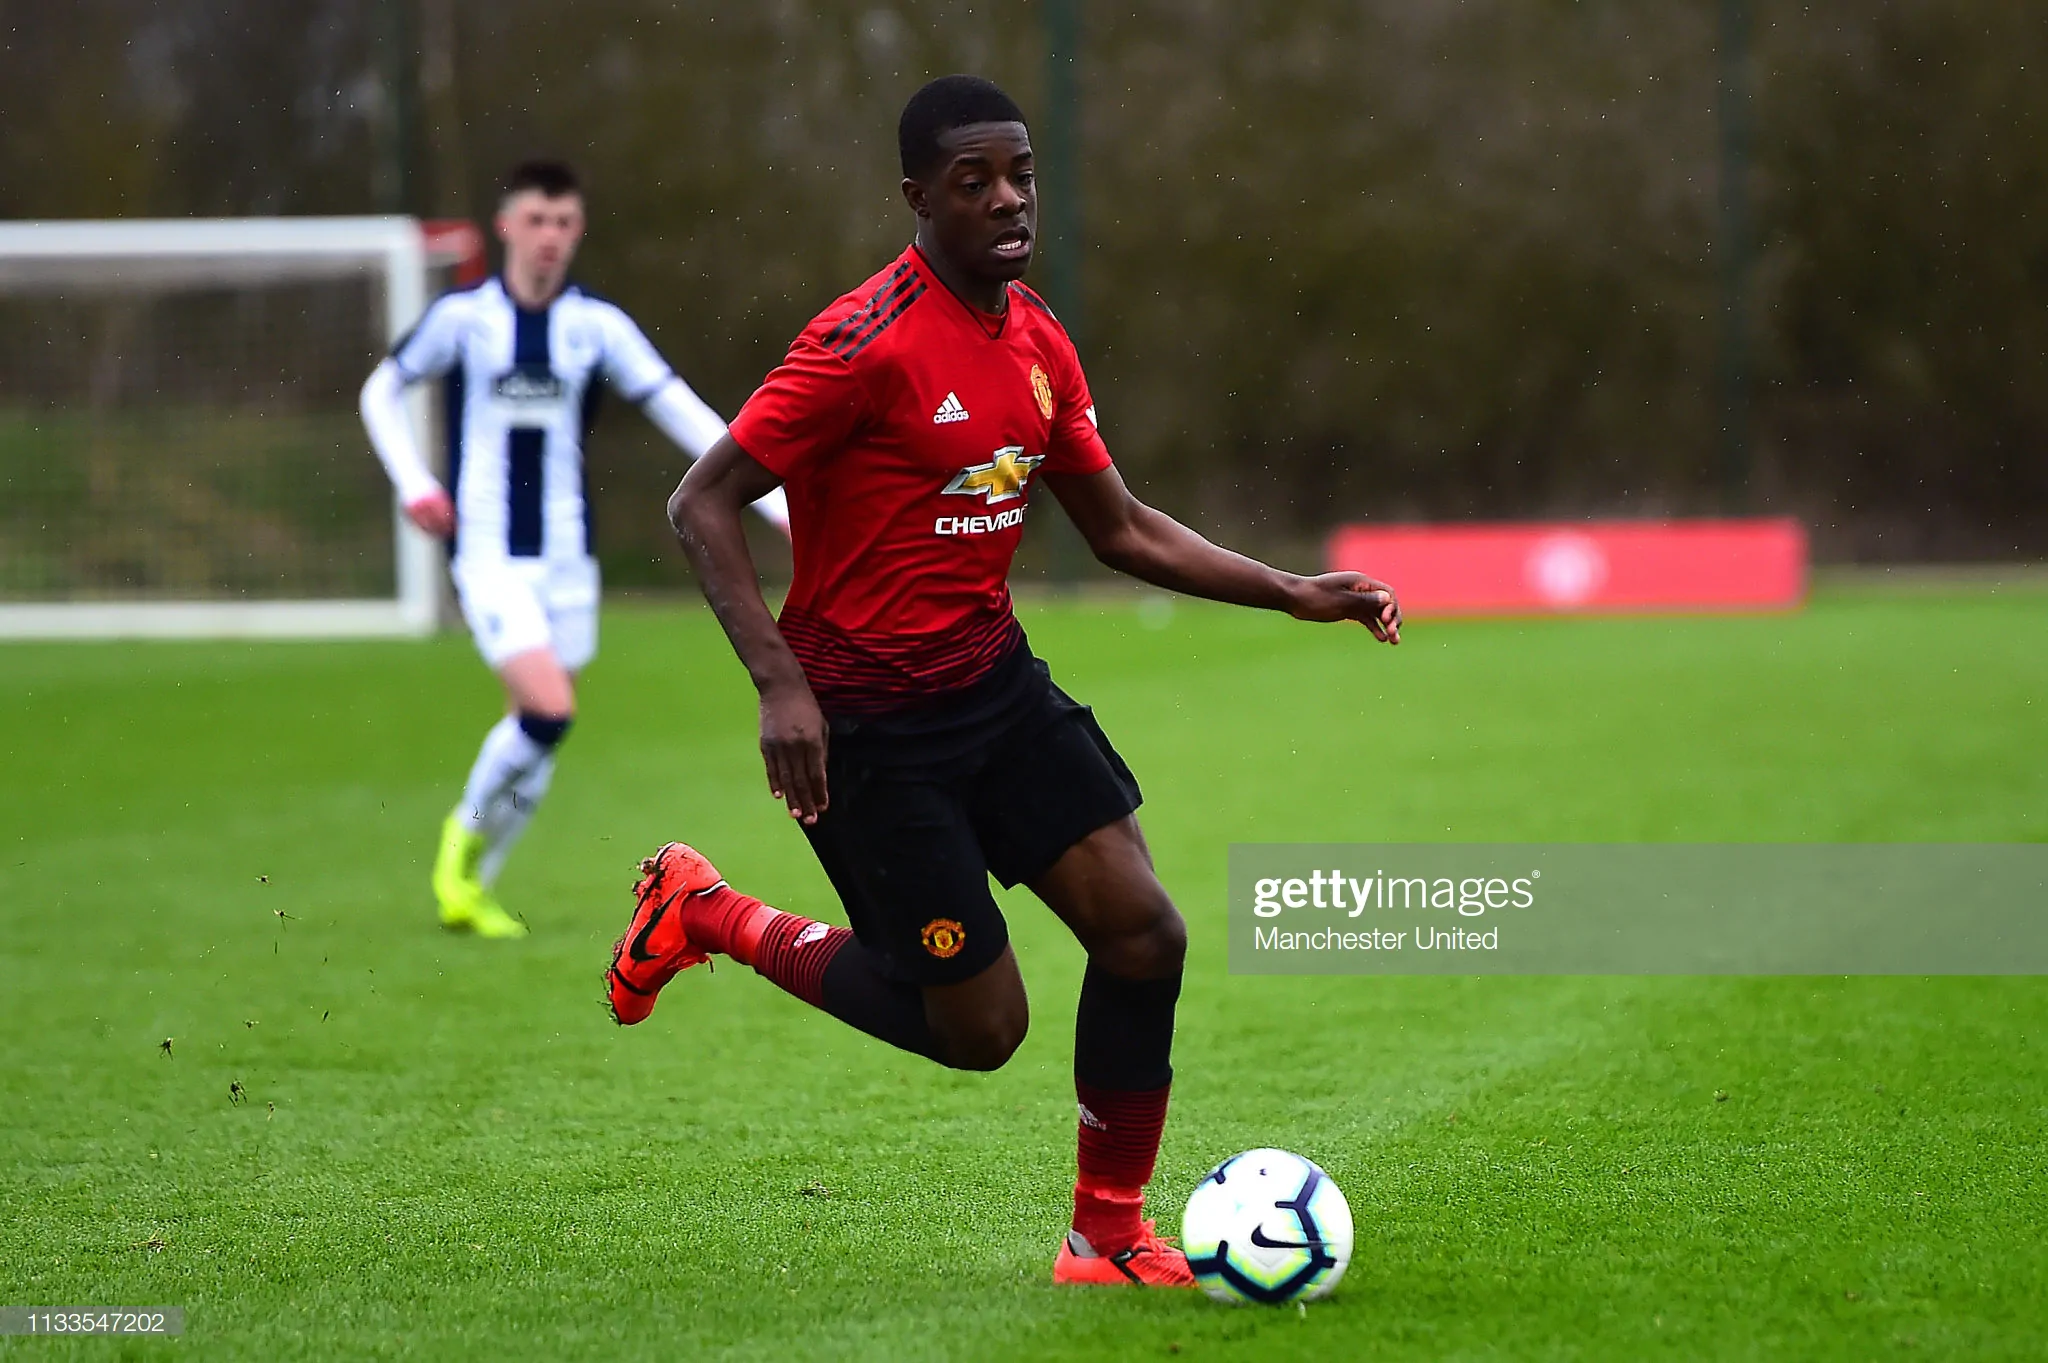 mipo-odubeko-of-manchester-united-u18s-in-action-during-the-u18-picture-id1133547202